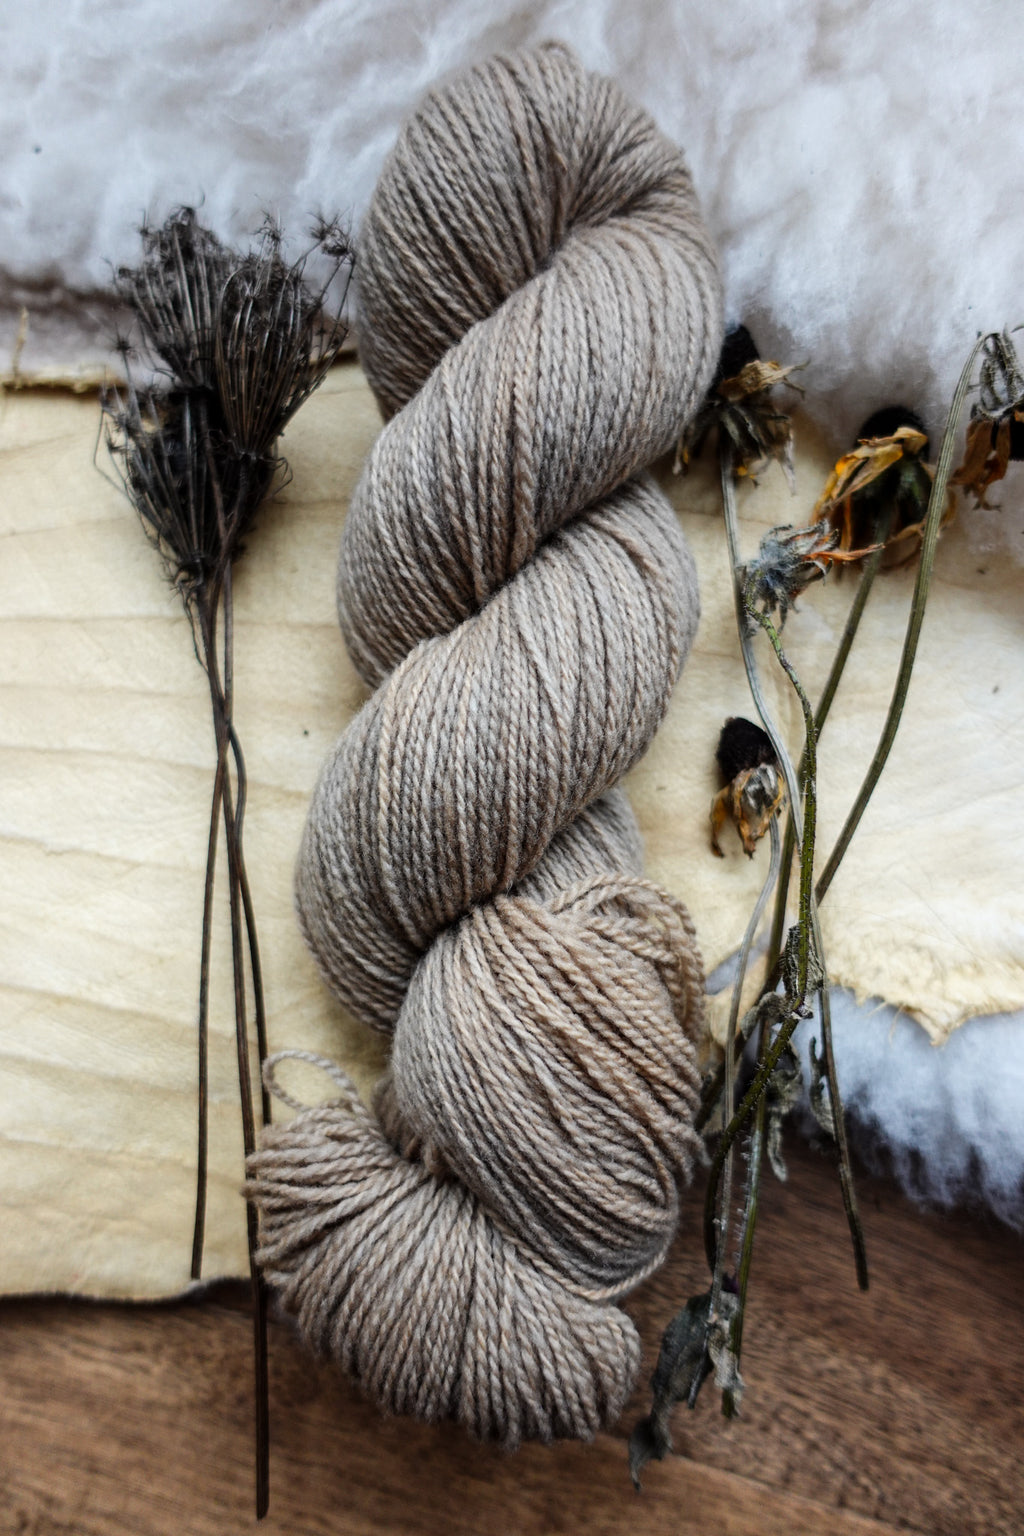 A skein of sport weight yarn has been dyed a light beige. It lays on a tabletop next to dried flowers and bark.